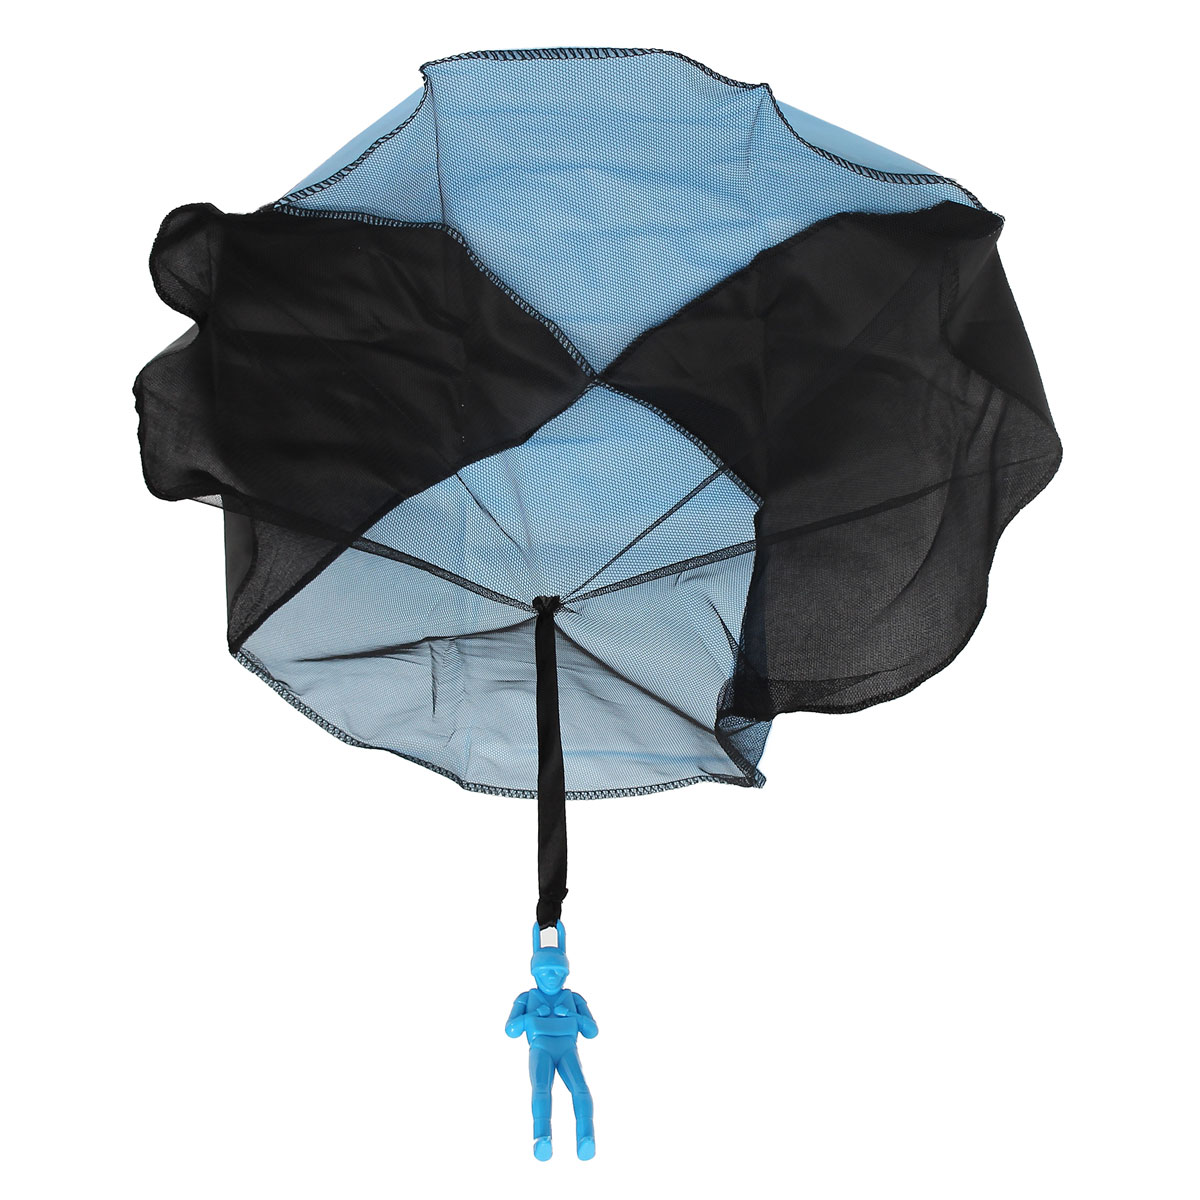 Kids-Hand-Throwing-Parachute-Kite-Outdoor-Play-Game-Toy-1021887-3